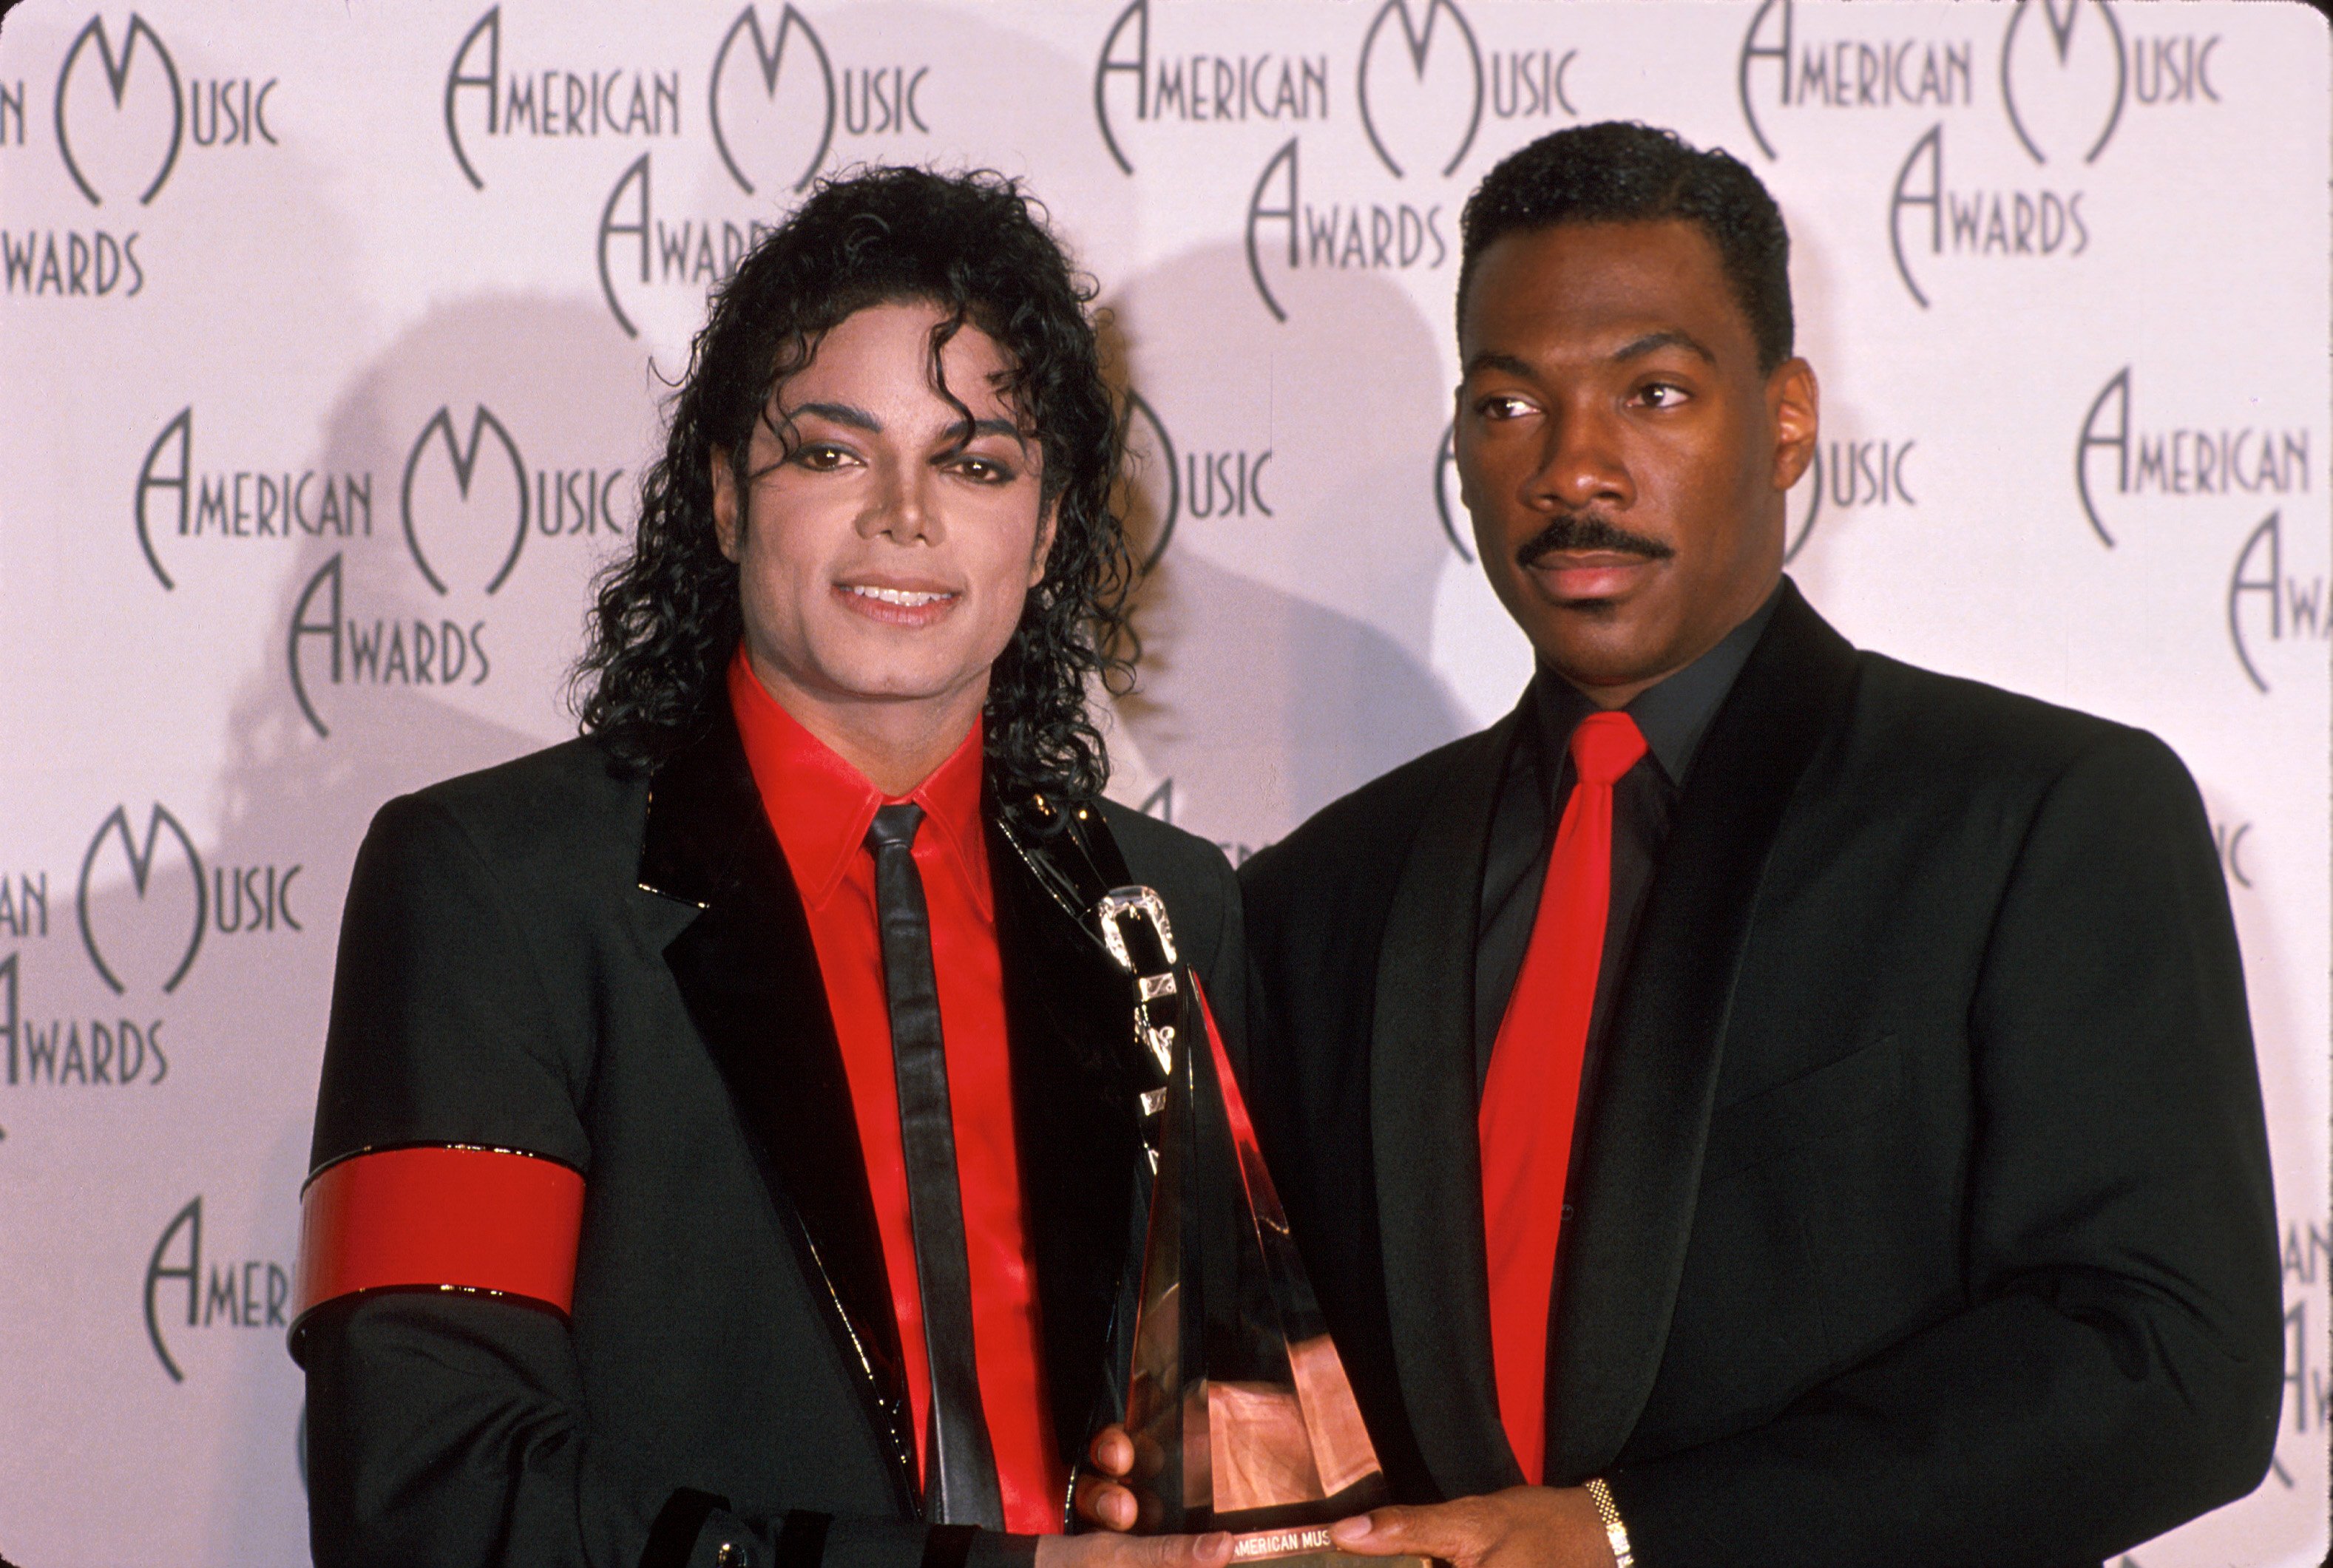 Michael Jackson and Eddie Murphy with an award